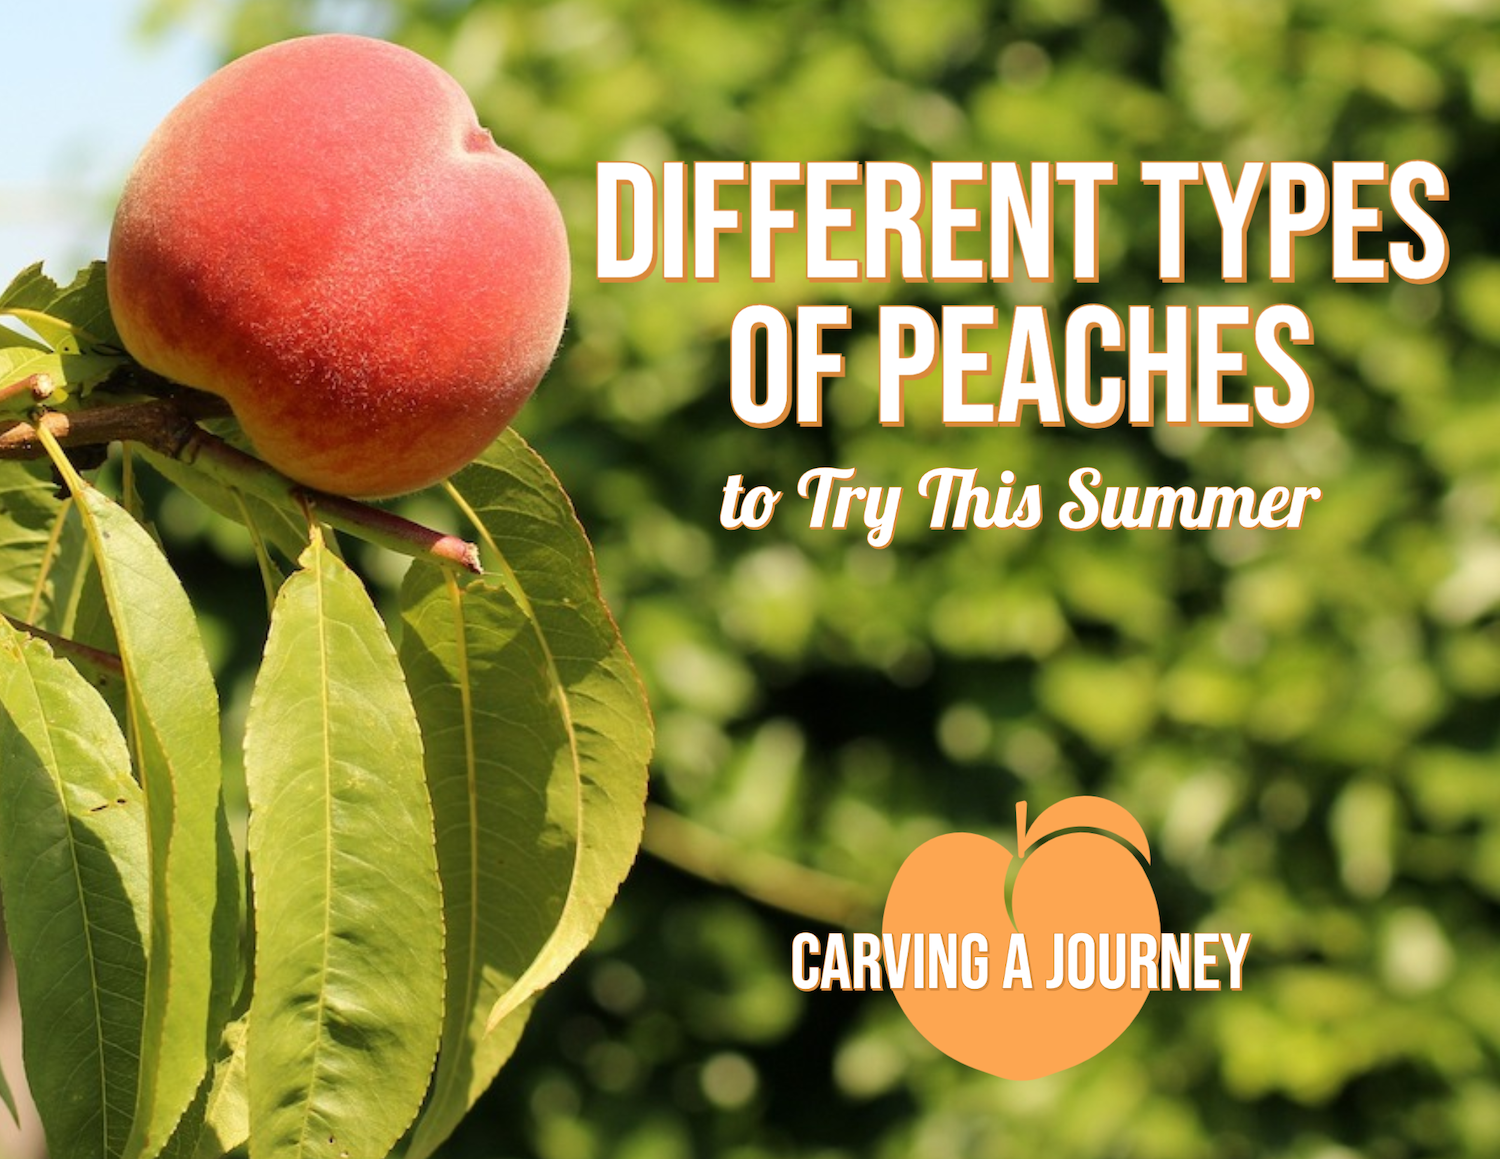 Different Types of Peaches